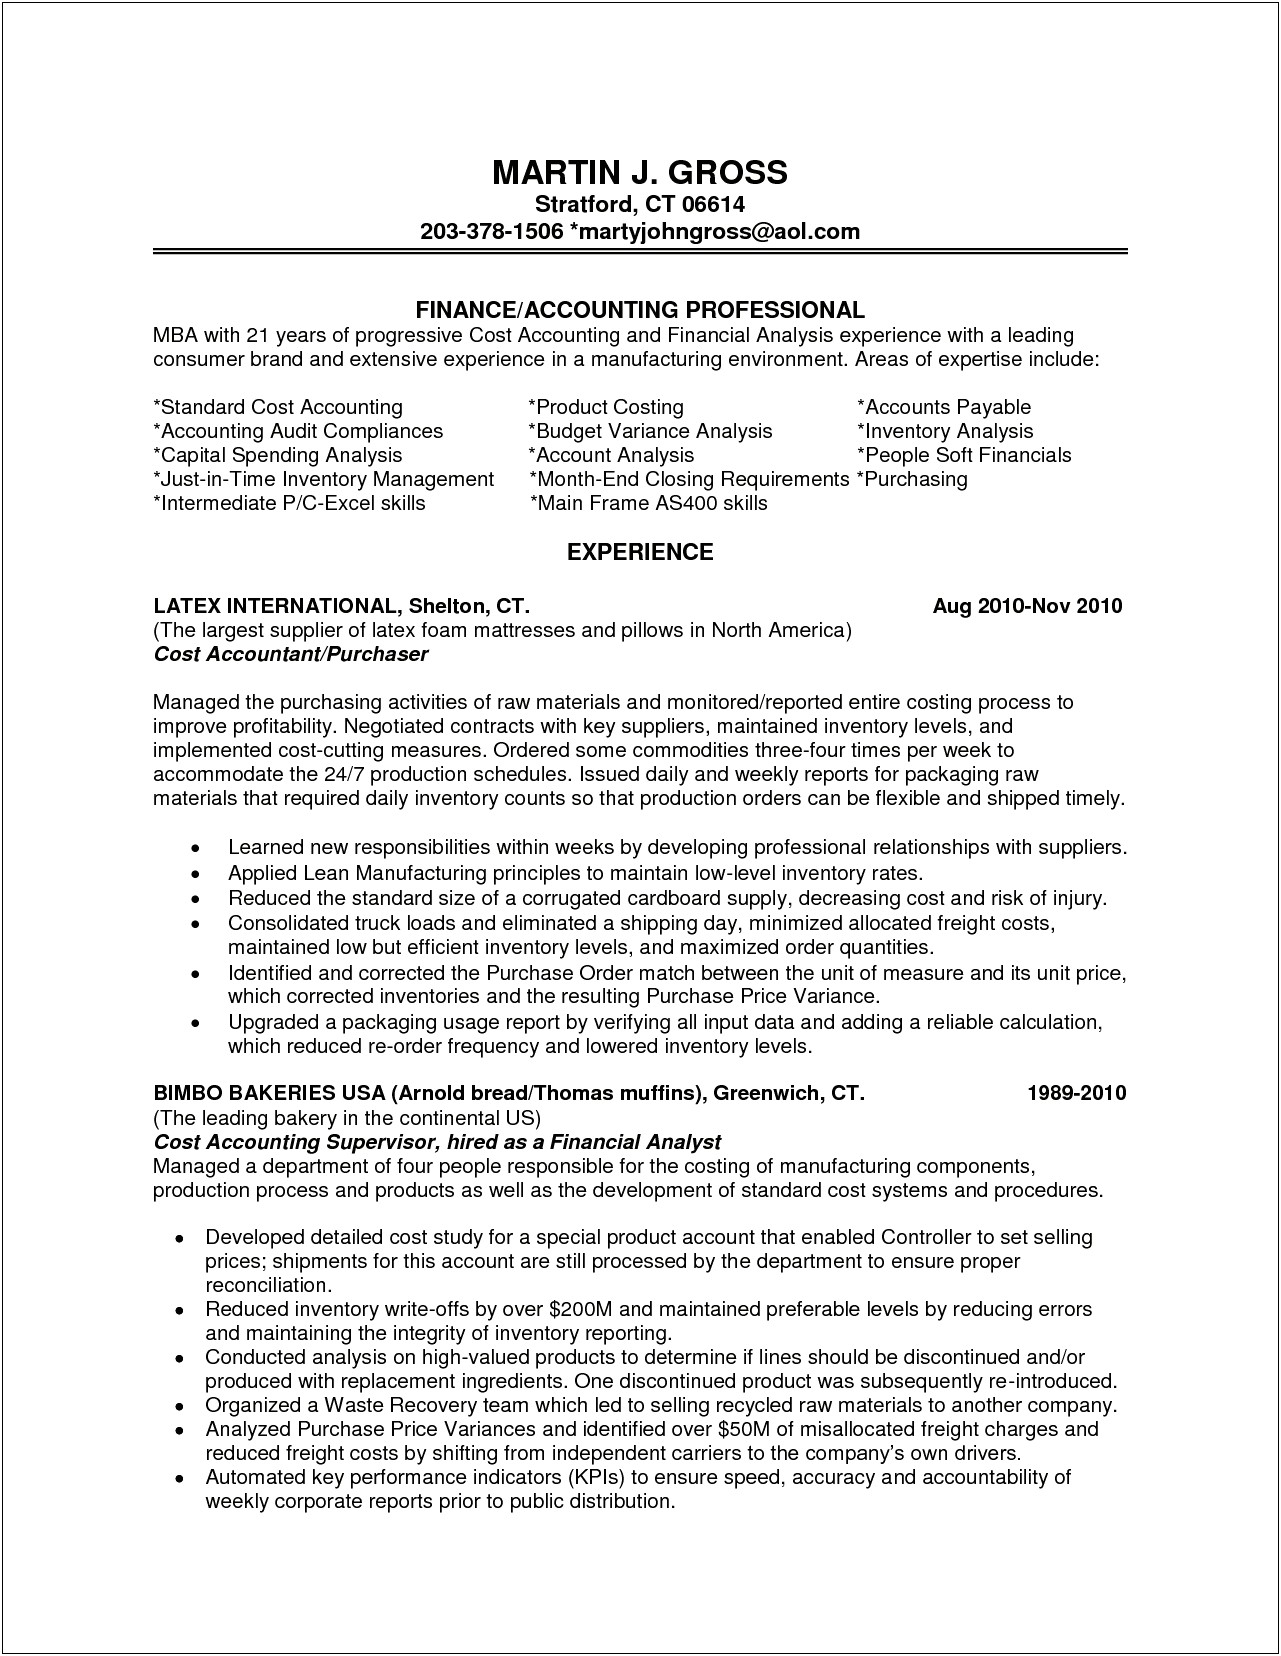 Sample Resume Entry Level Financial Analyst